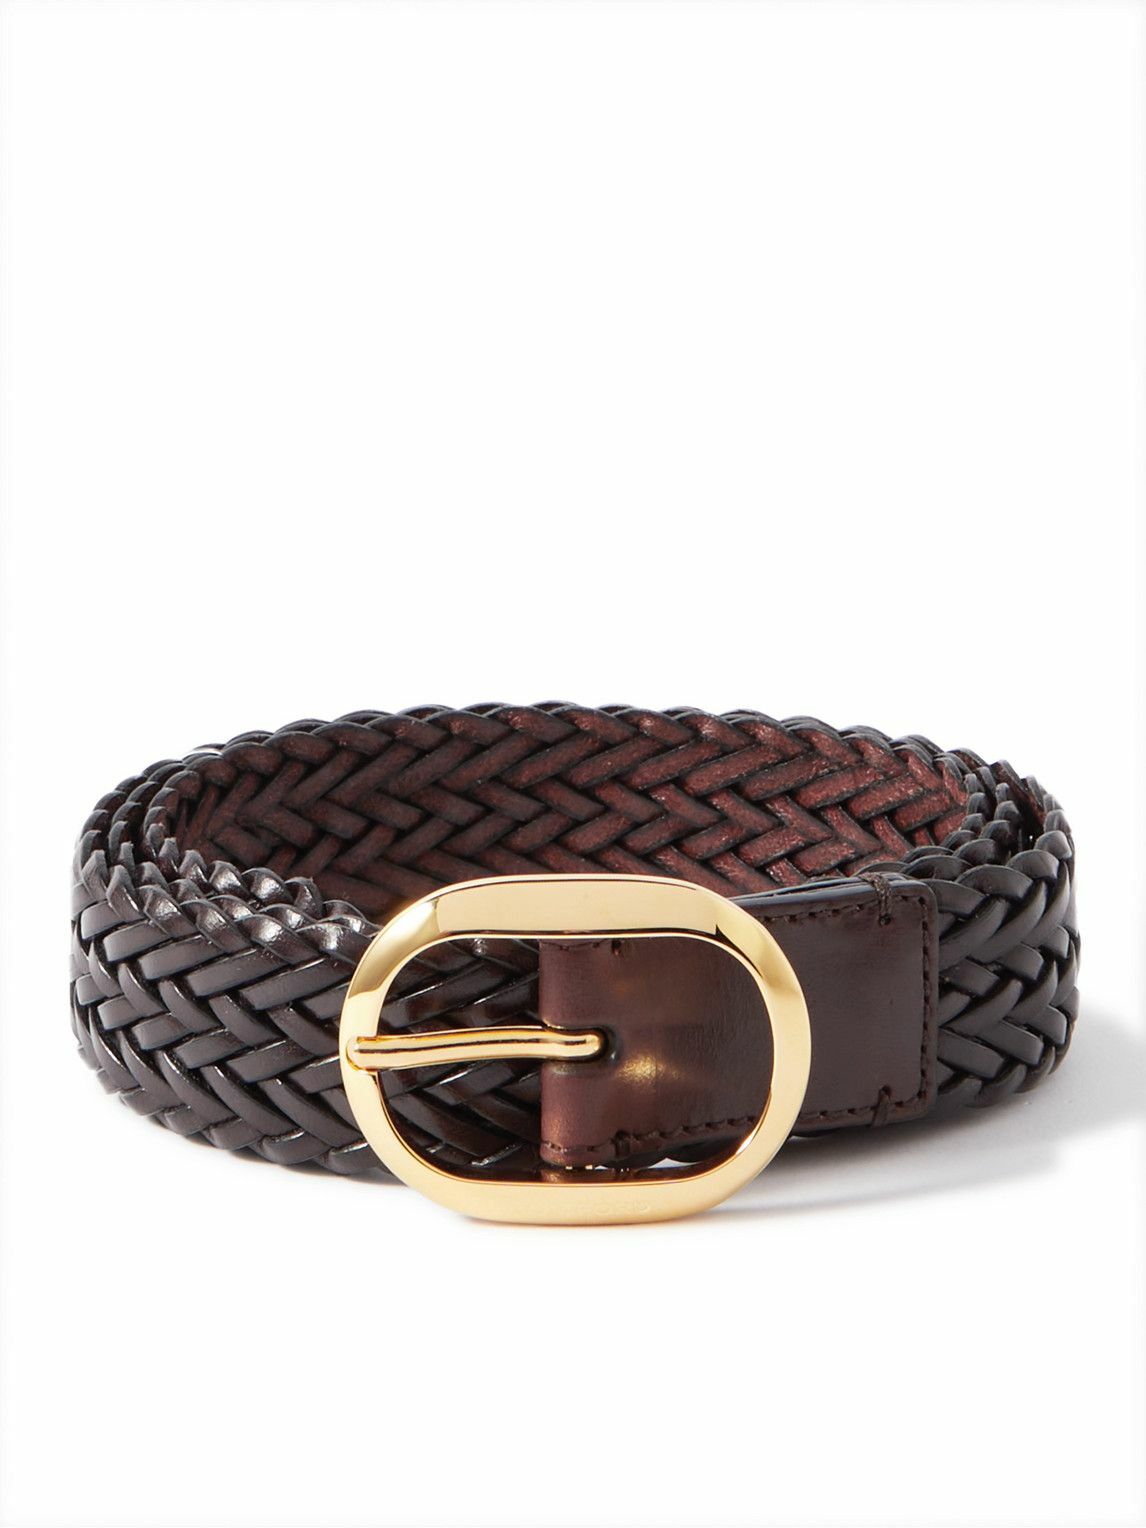 TOM FORD - 3cm Woven Leather Belt - Brown TOM FORD